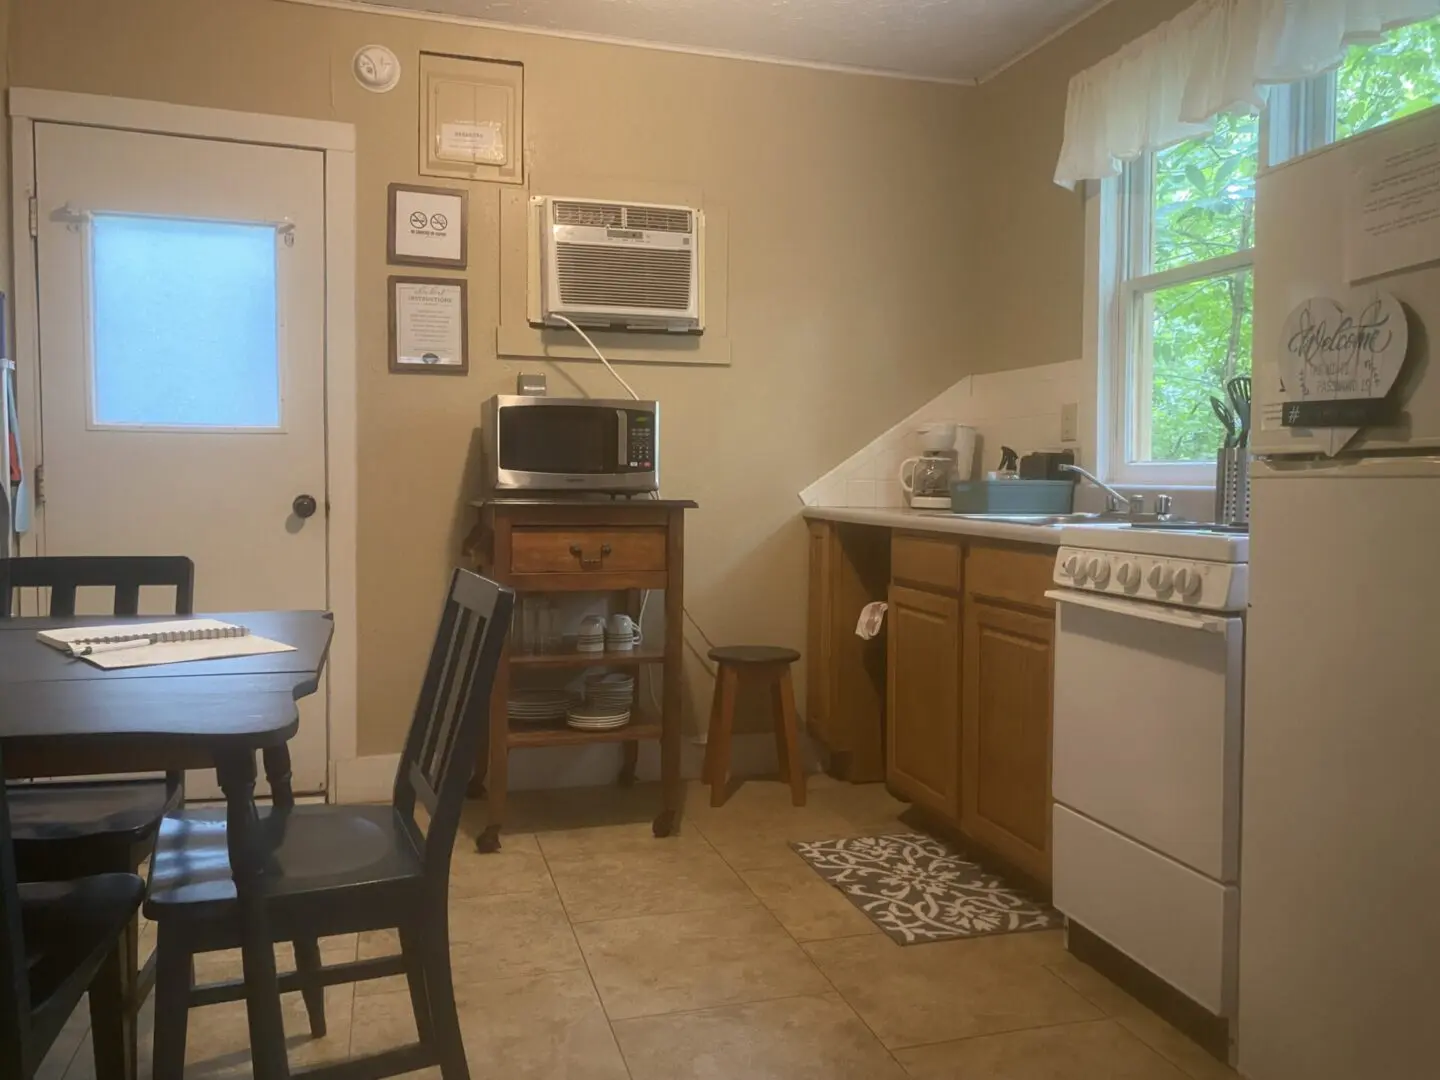 A kitchen with a microwave, sink and refrigerator.